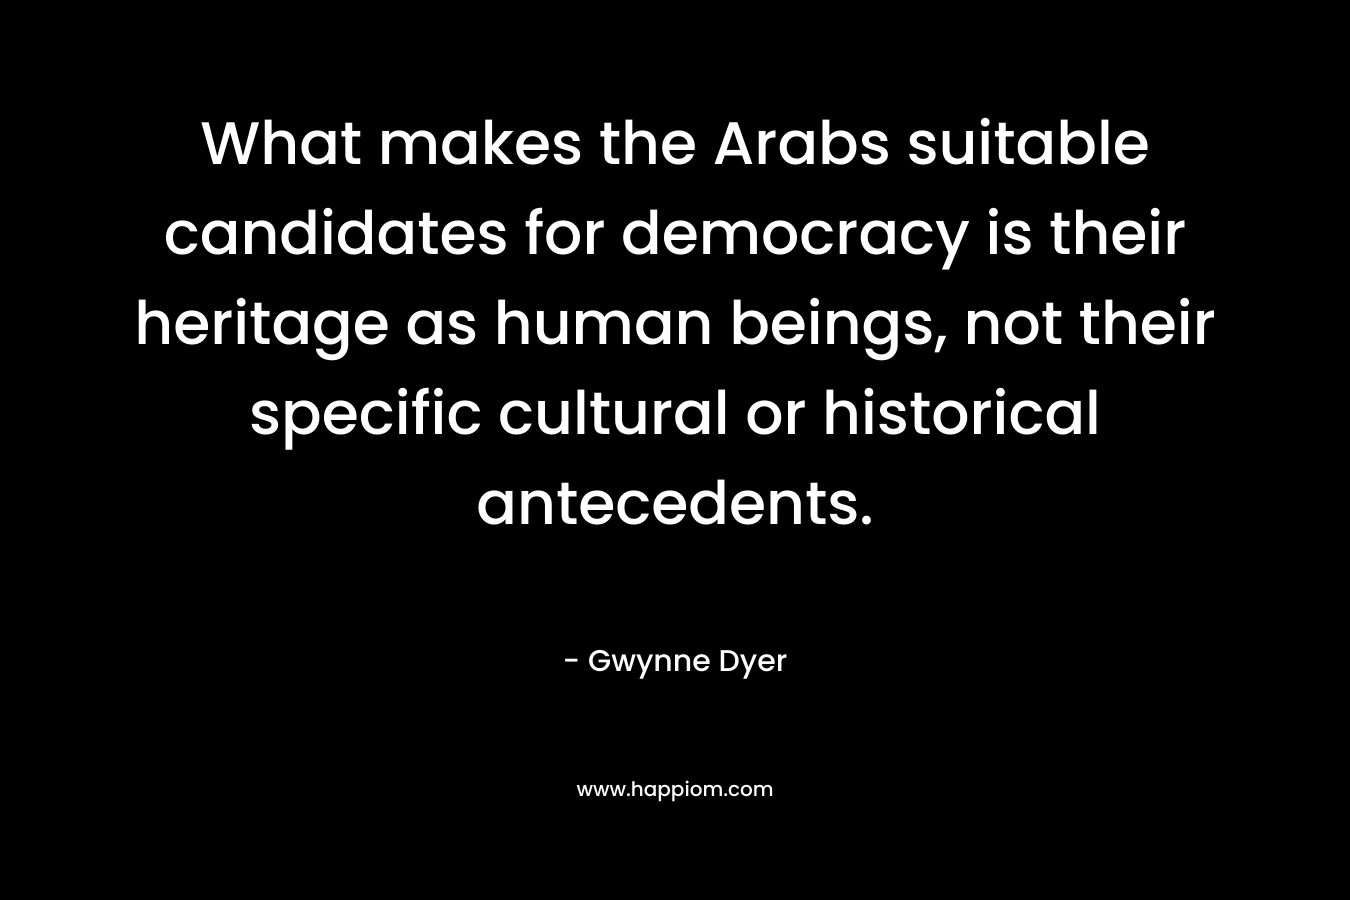 What makes the Arabs suitable candidates for democracy is their heritage as human beings, not their specific cultural or historical antecedents. – Gwynne Dyer